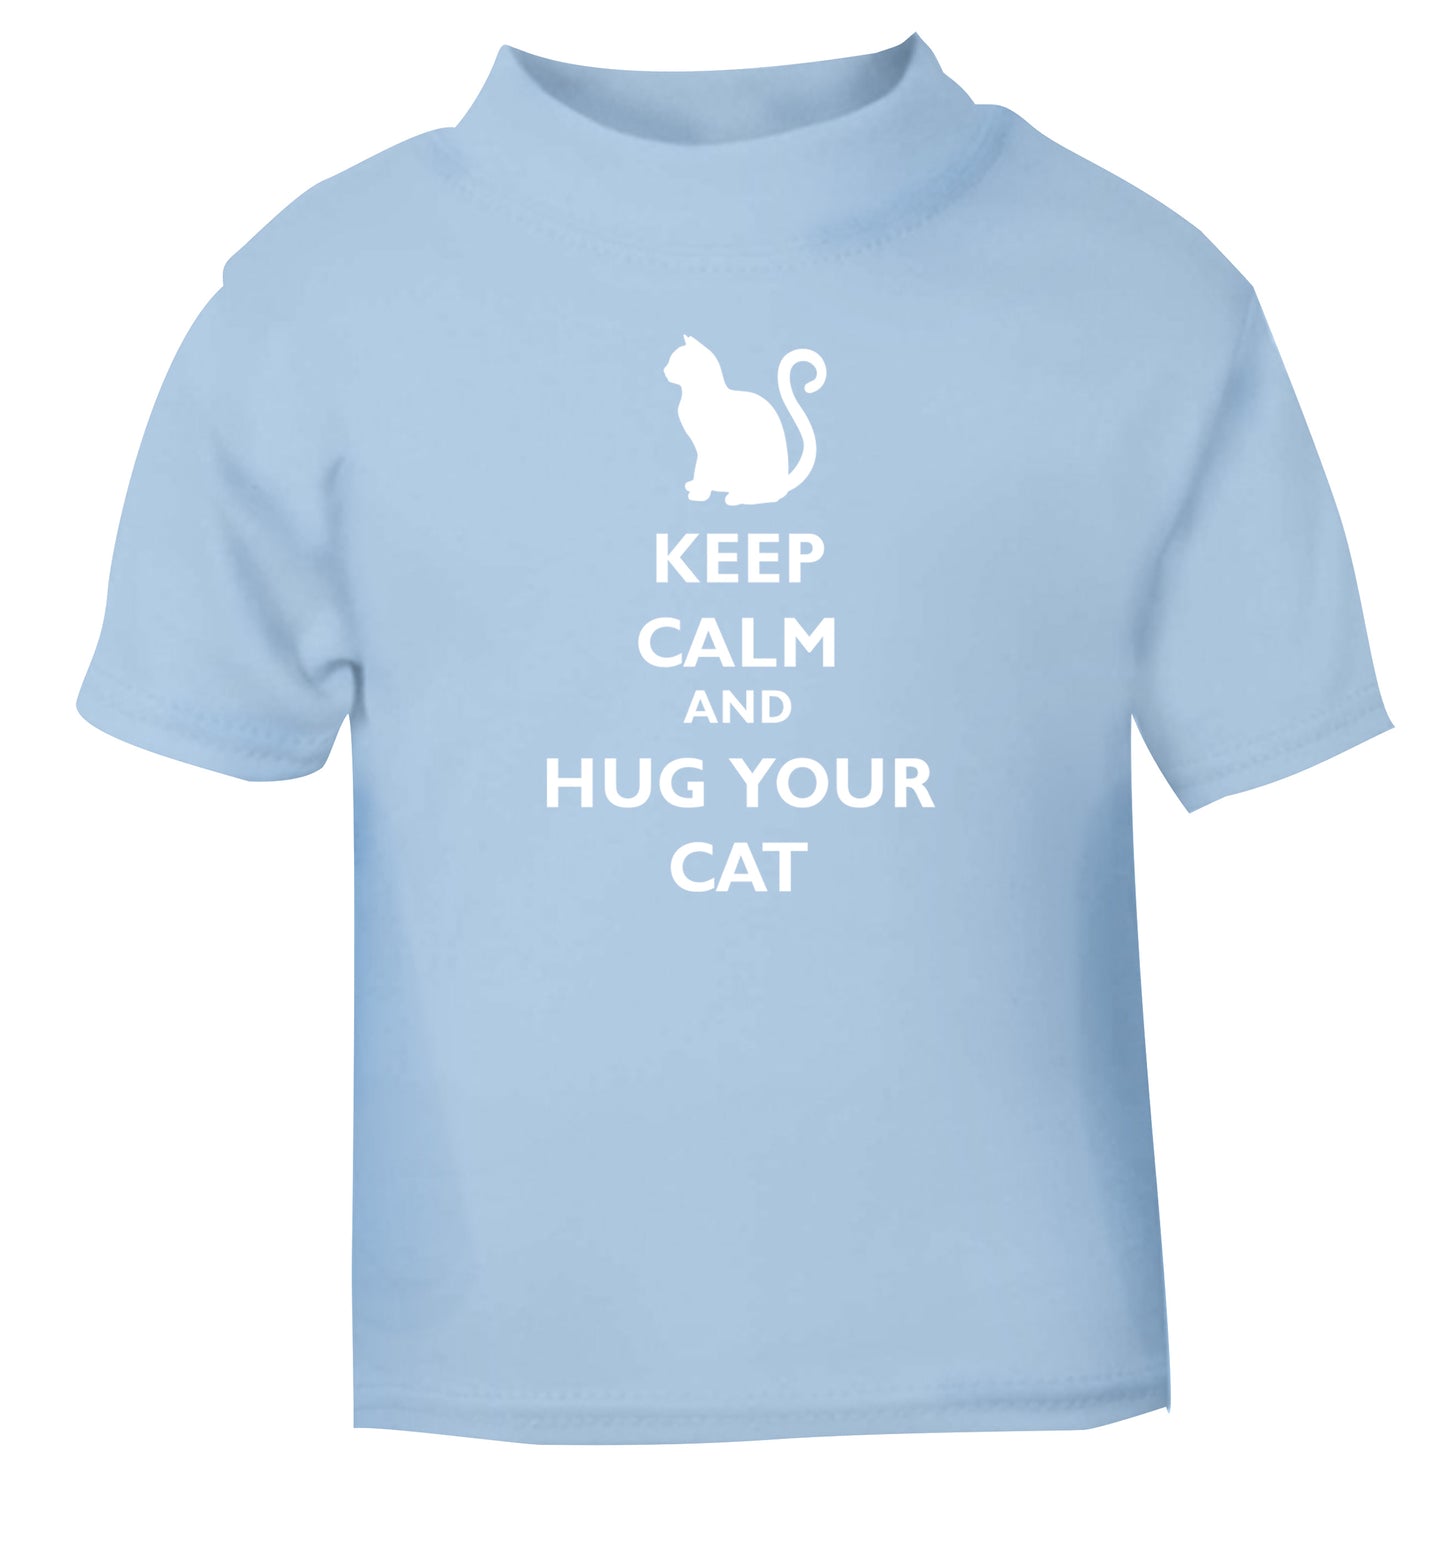 Keep calm and hug your cat light blue Baby Toddler Tshirt 2 Years